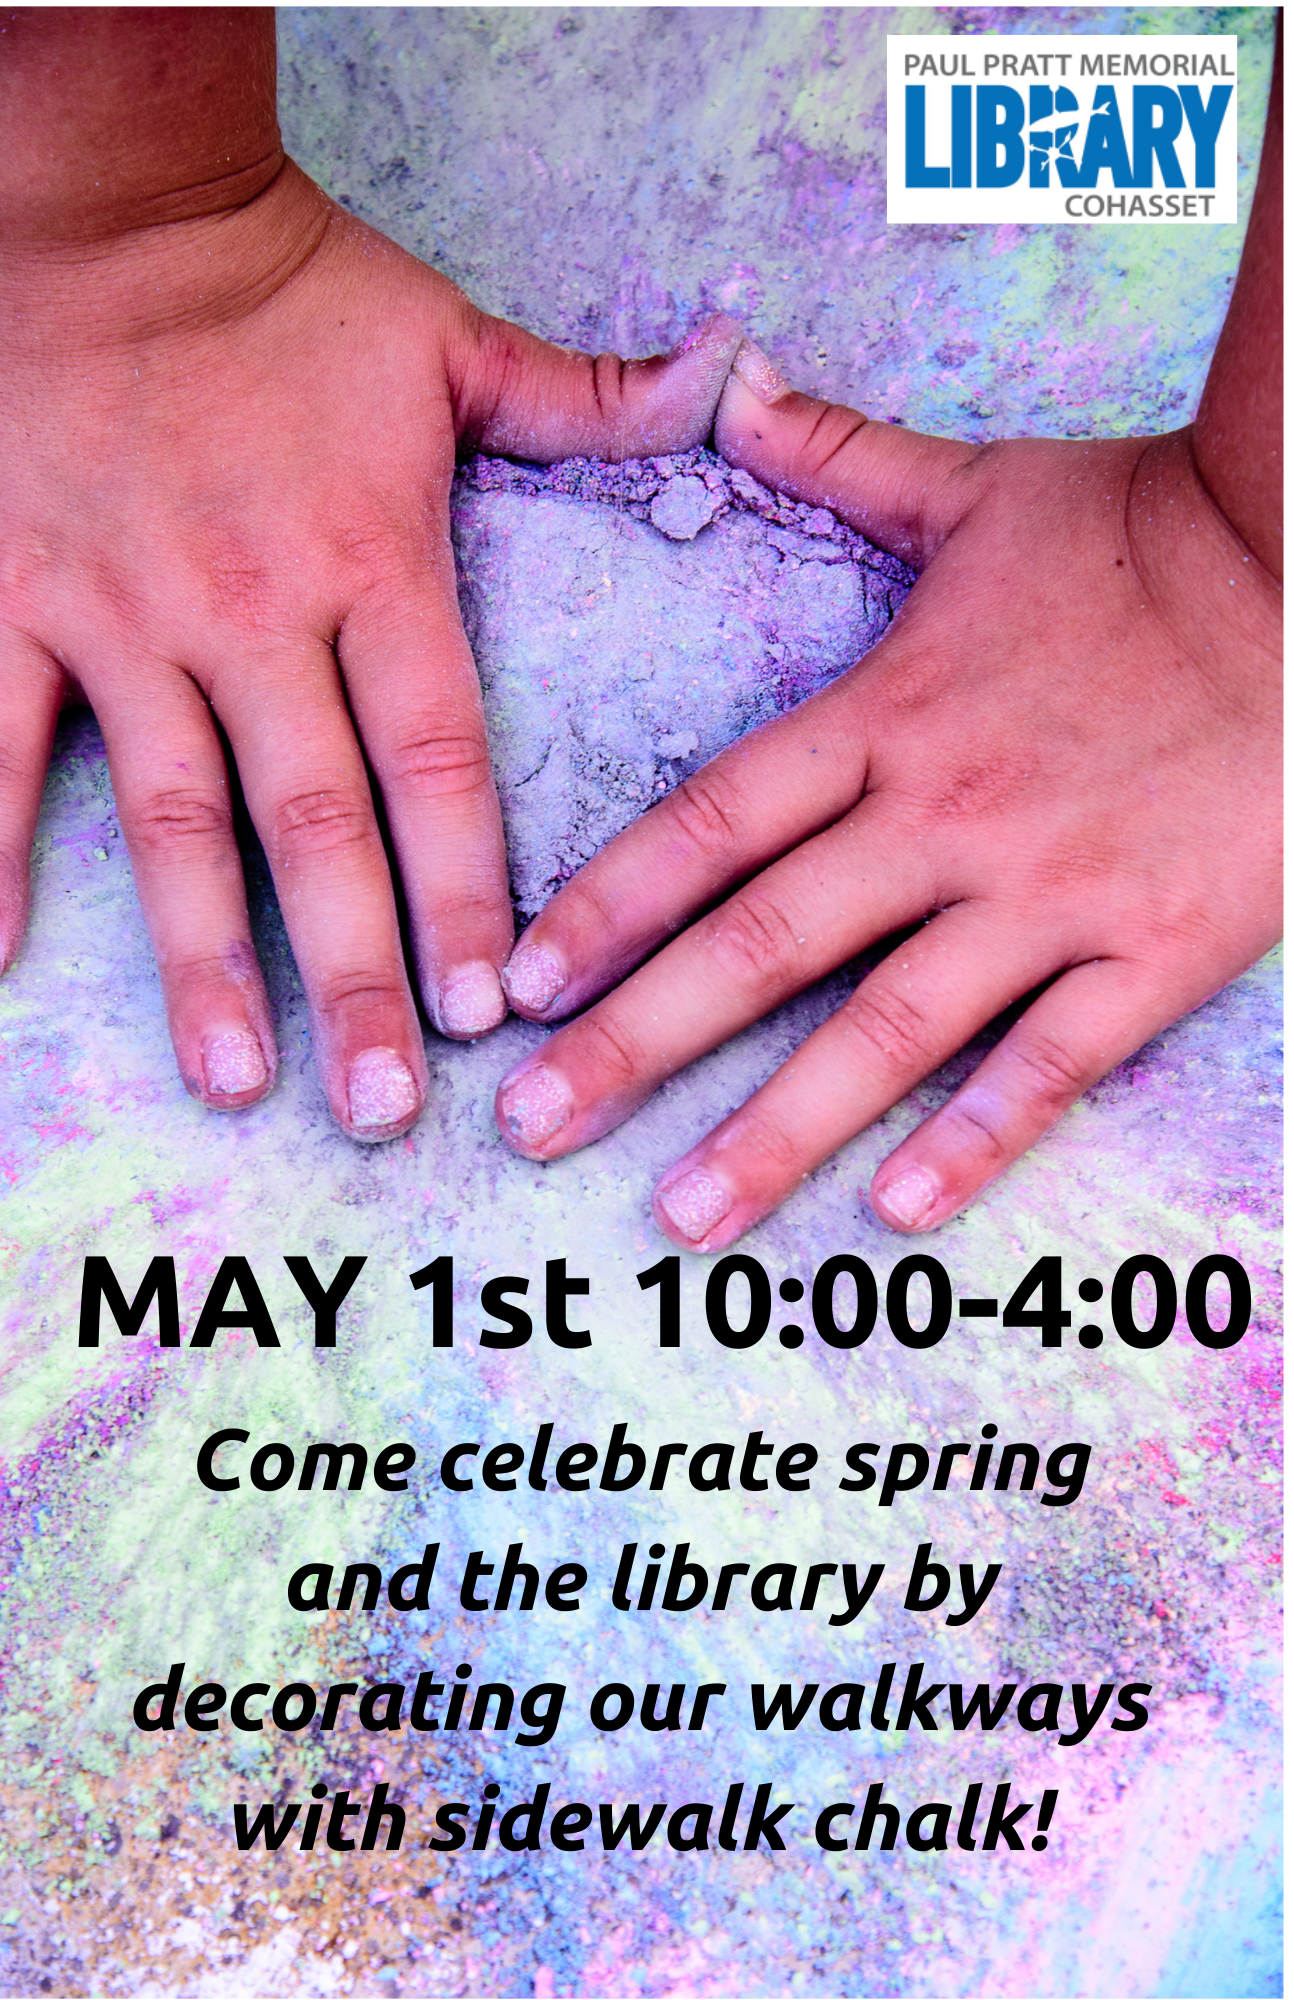 Sidewalk chalk event for all ages